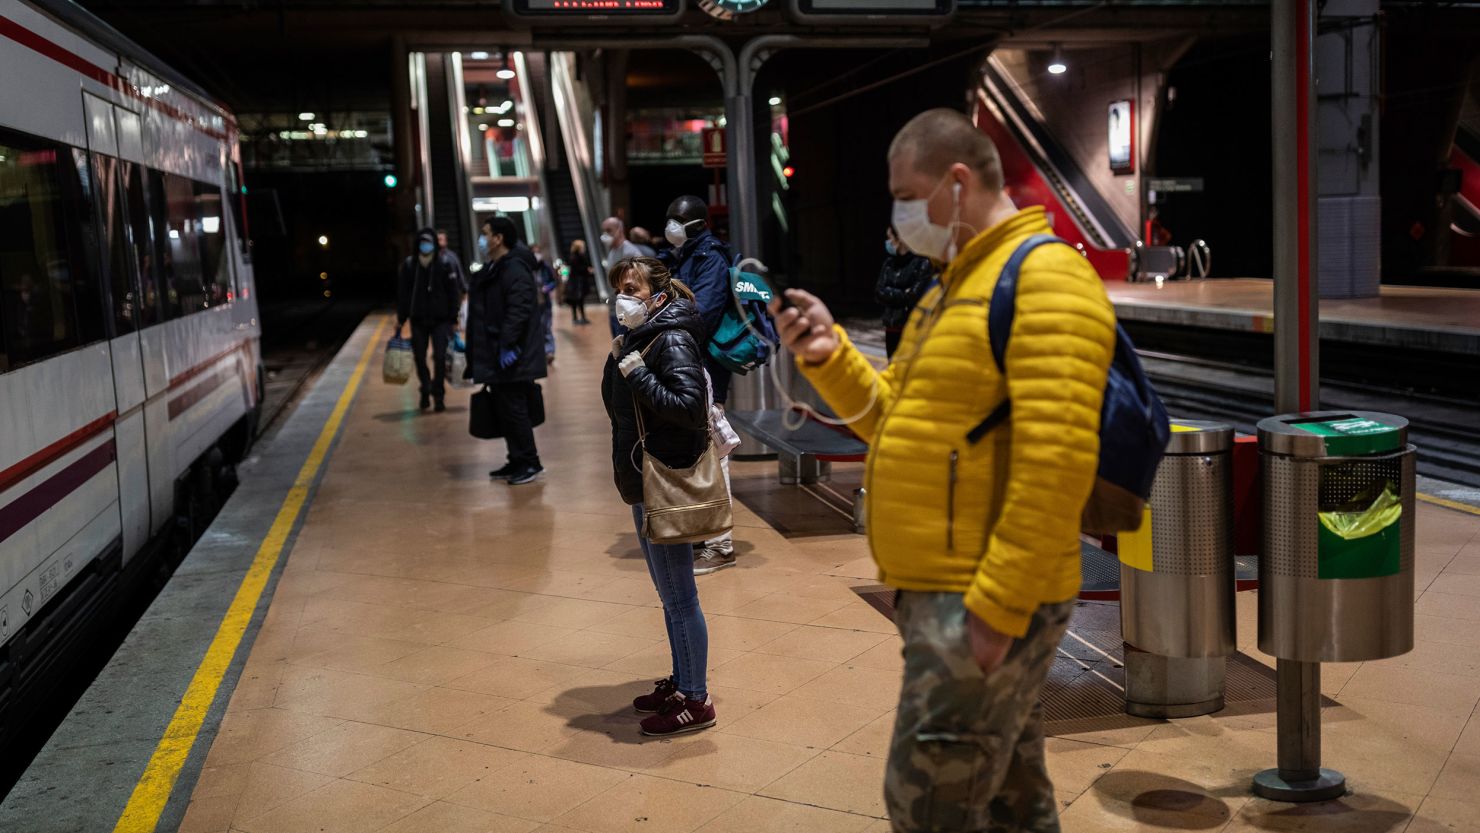 Commuters wear face masks to protect against coronavirus at a train station in Madrid on April 13.